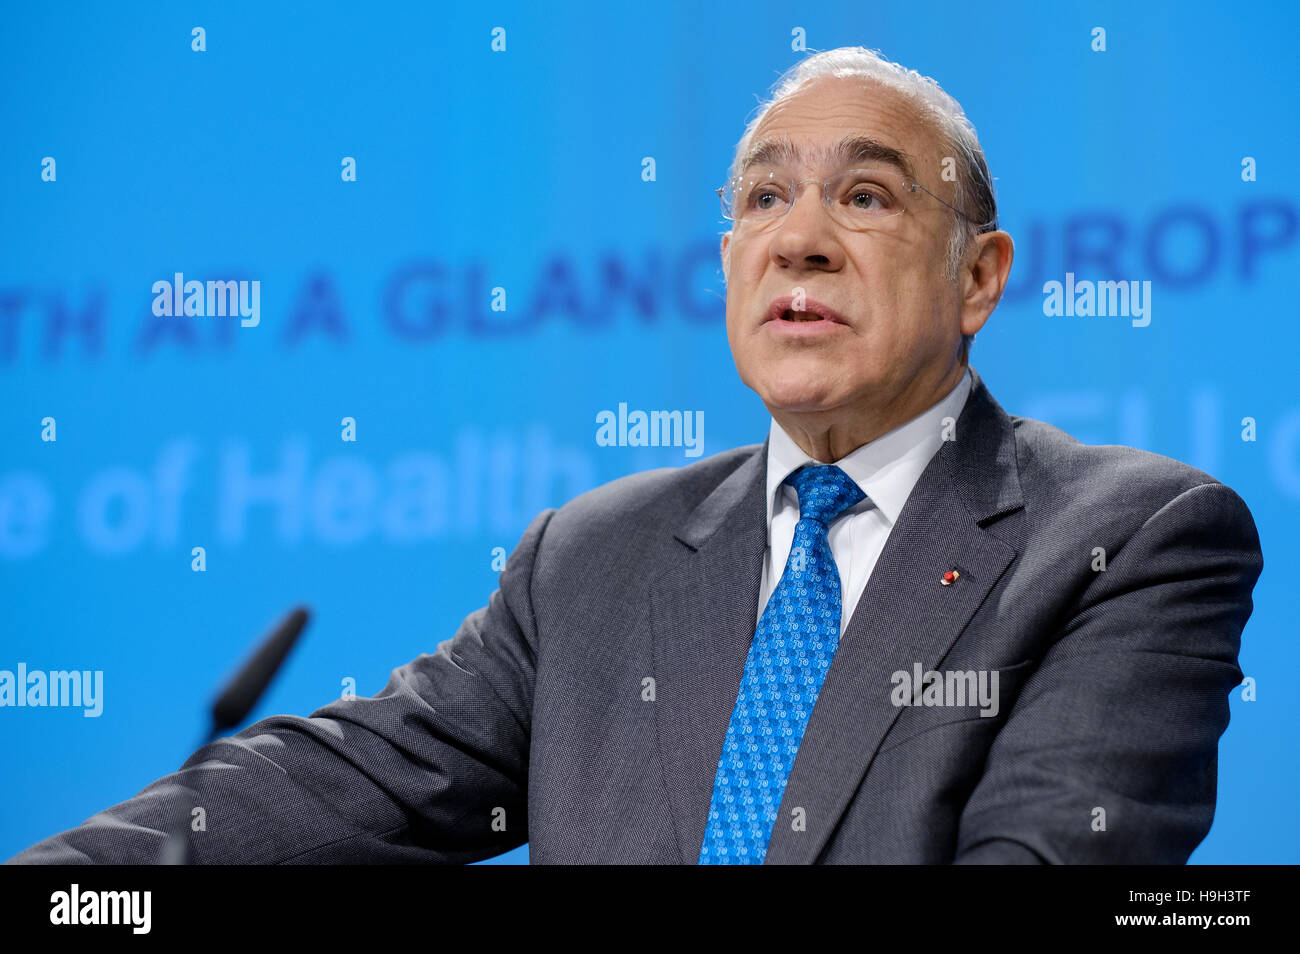 Brussels, Belgium. 23rd Nov, 2016. EU Commissioner for Health and Food Safety (Not pictured) and Secretary General of the Organization for Economic Co-operation and Development (OECD) Angel Gurria give a press conference to present a new European Commission/OECD joint report in Brussels, Belgium, 23 November 2016. - NO WIRE SERVICE - Photo: Thierry Monasse/dpa/Alamy Live News Stock Photo